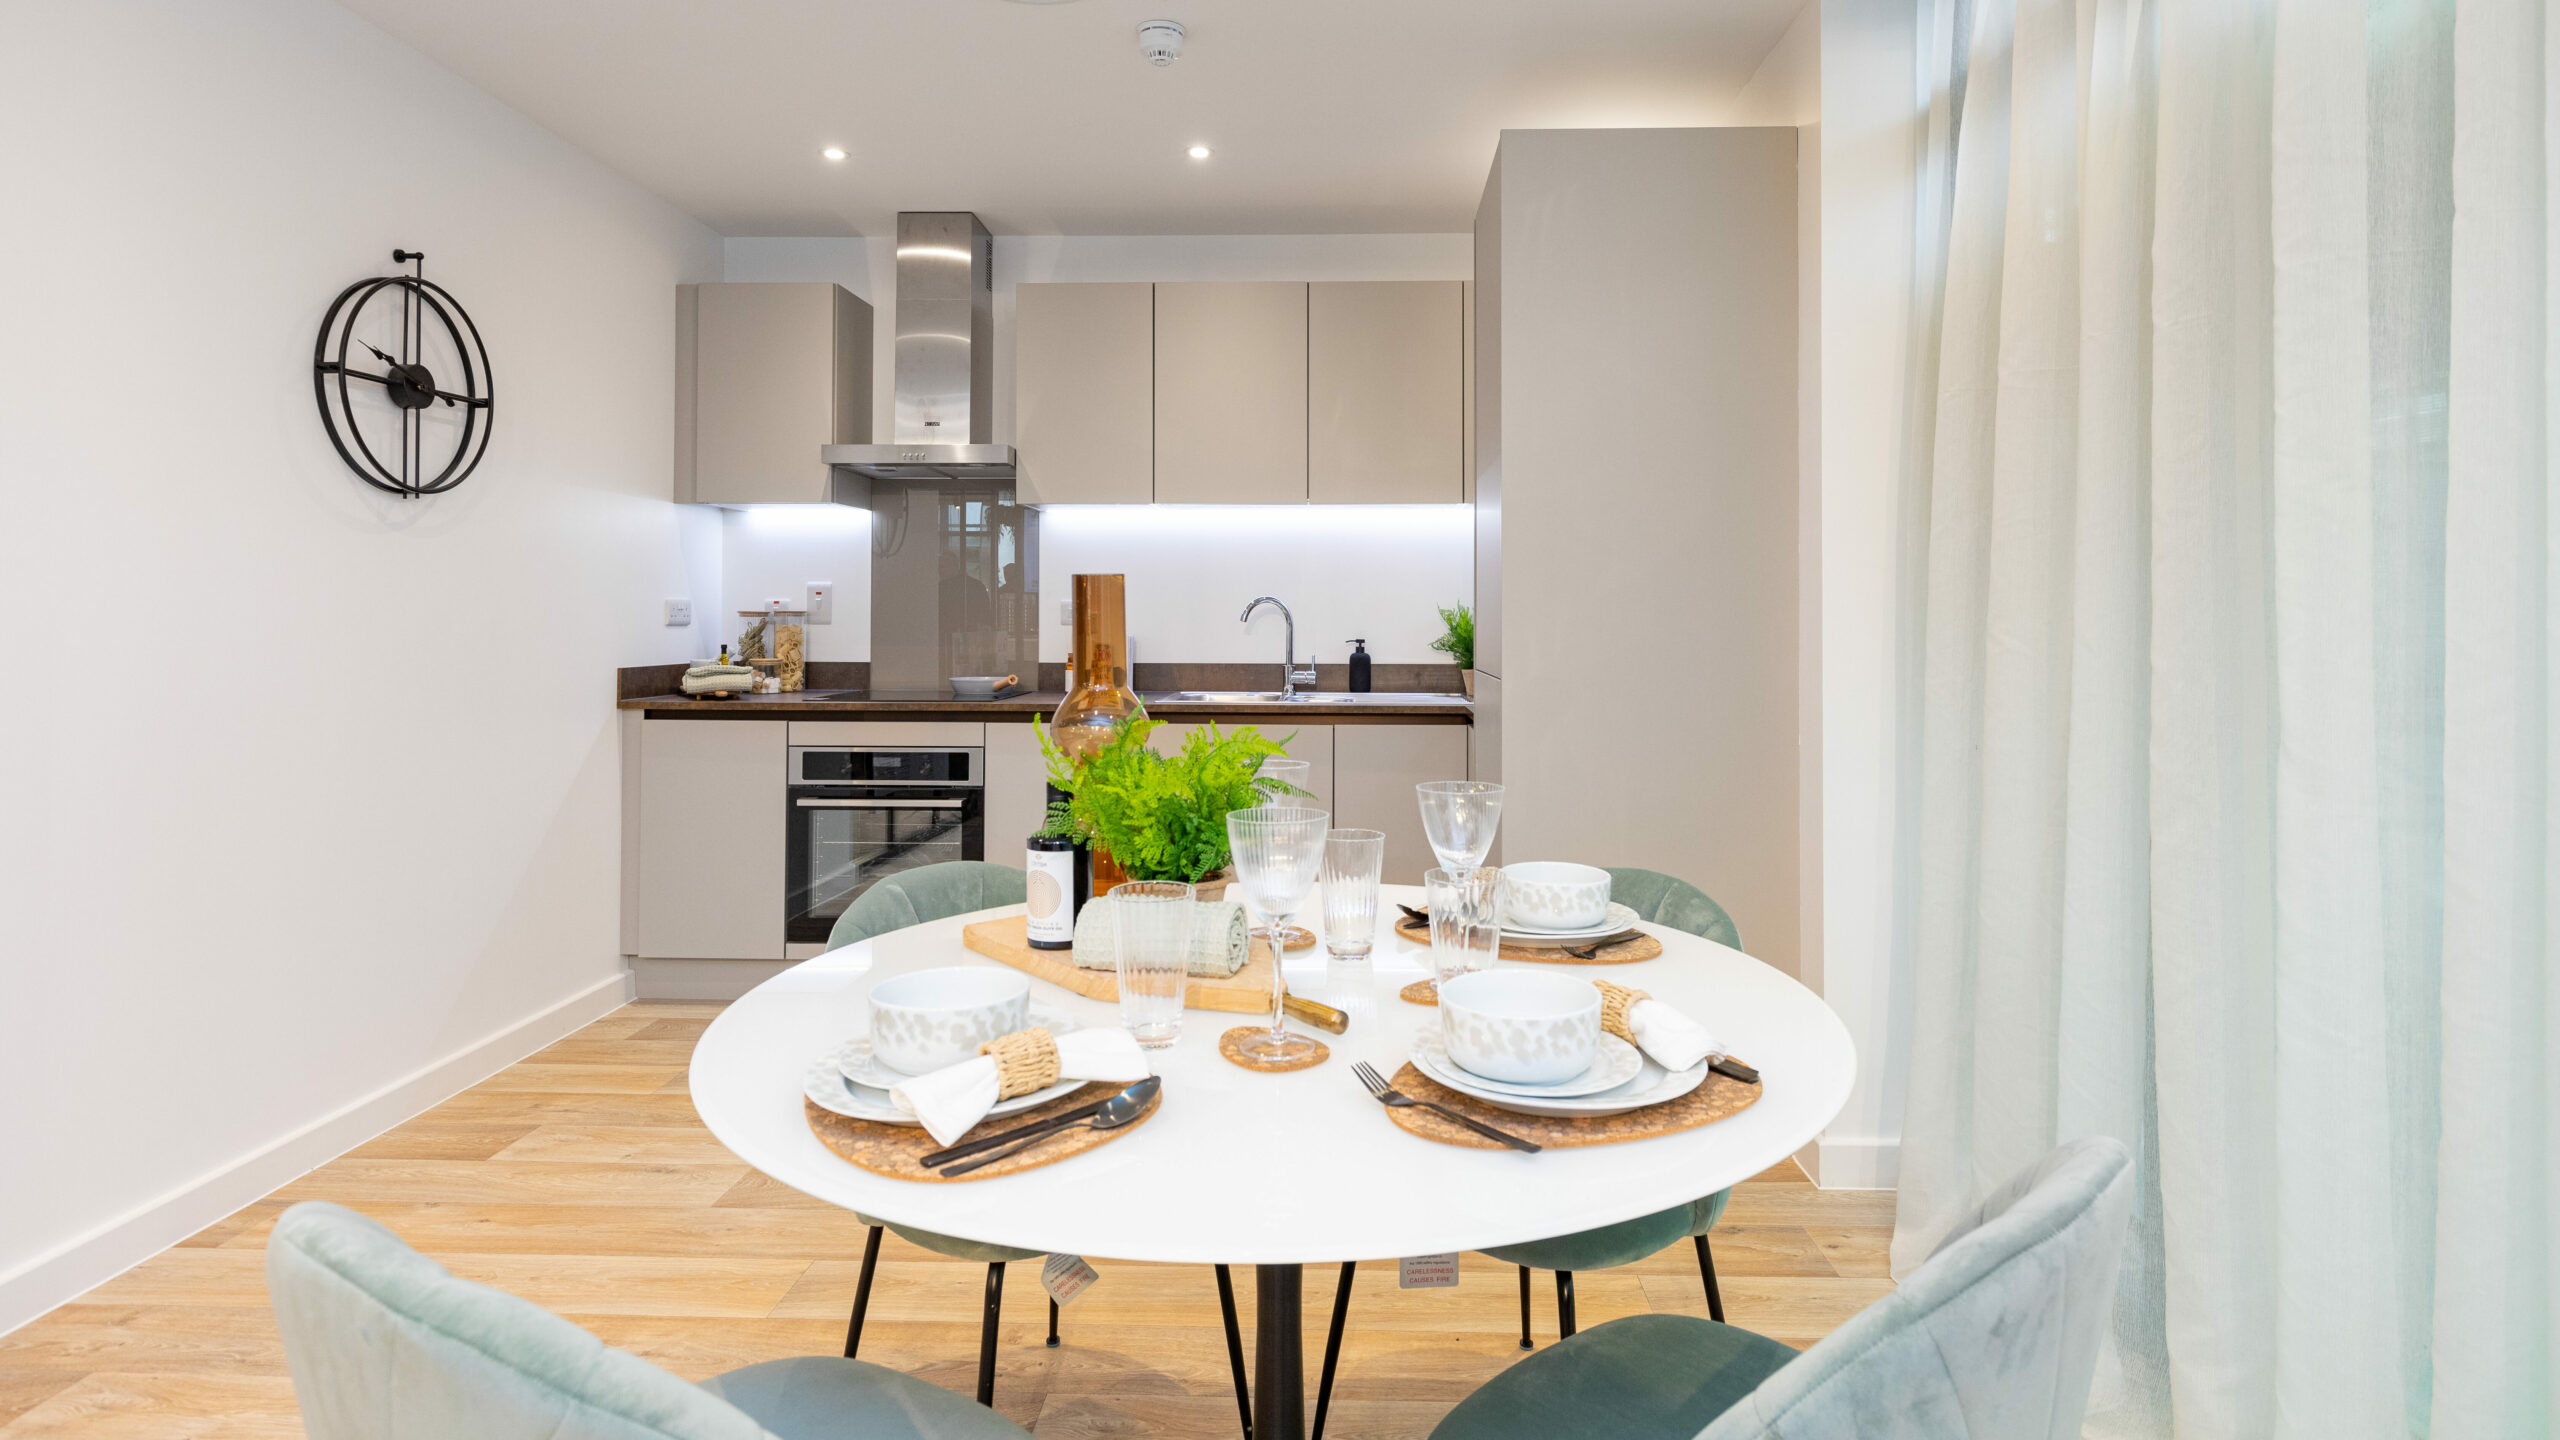 An internal image of Guinness Homes' Signal Park development - available to purchase through Shared Ownership on Share to Buy!